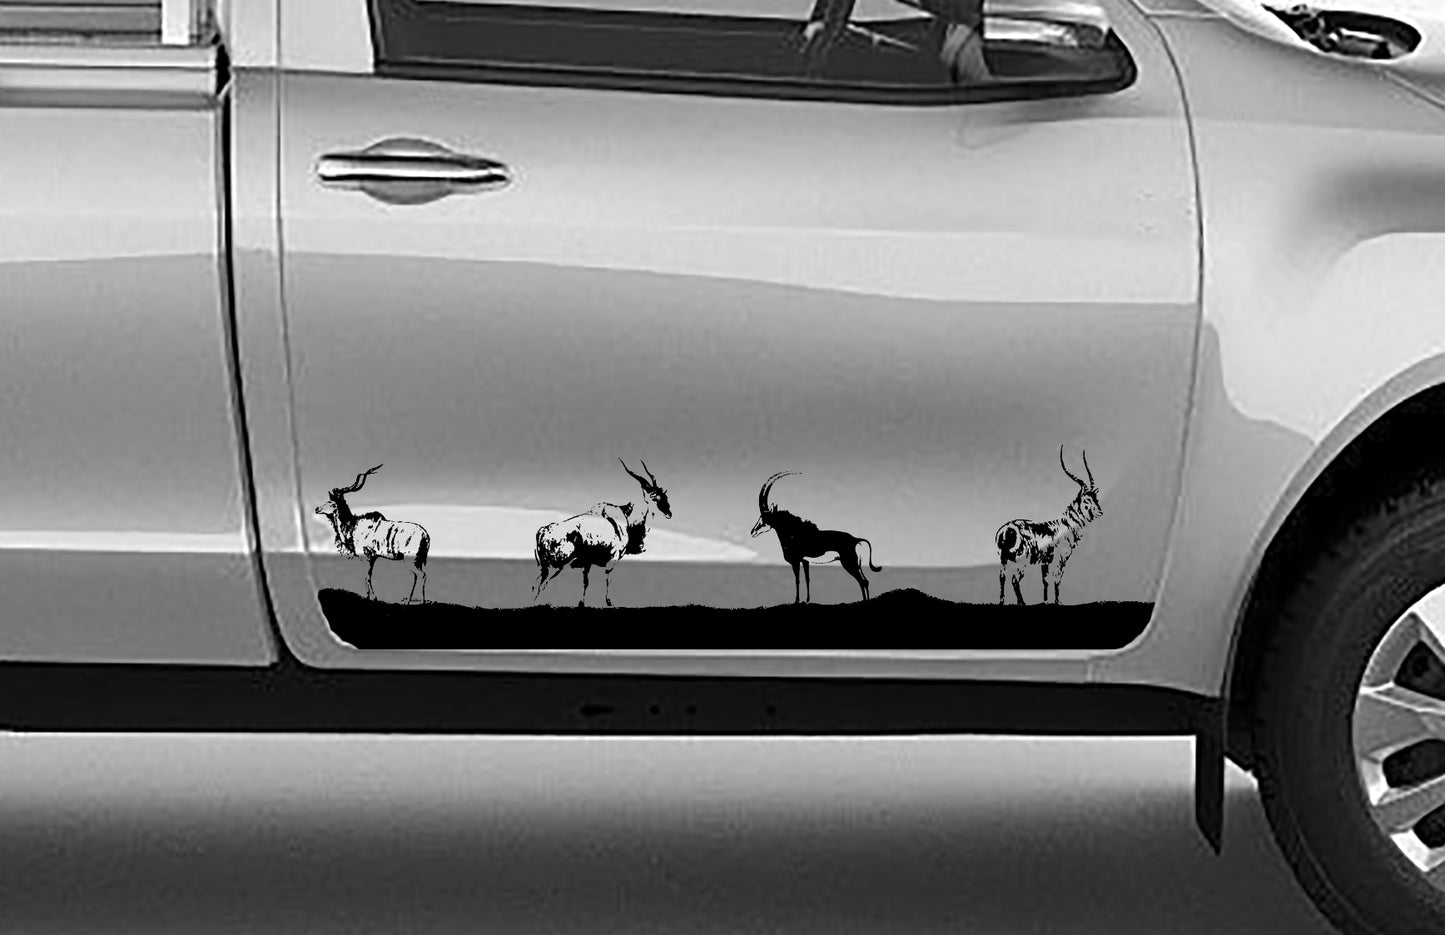 1 Set of 2 Side Door Vinyl Decal Sticker Ford Ranger or Toyota Hilux  | Kudu, Eland, Sable and Waterbok